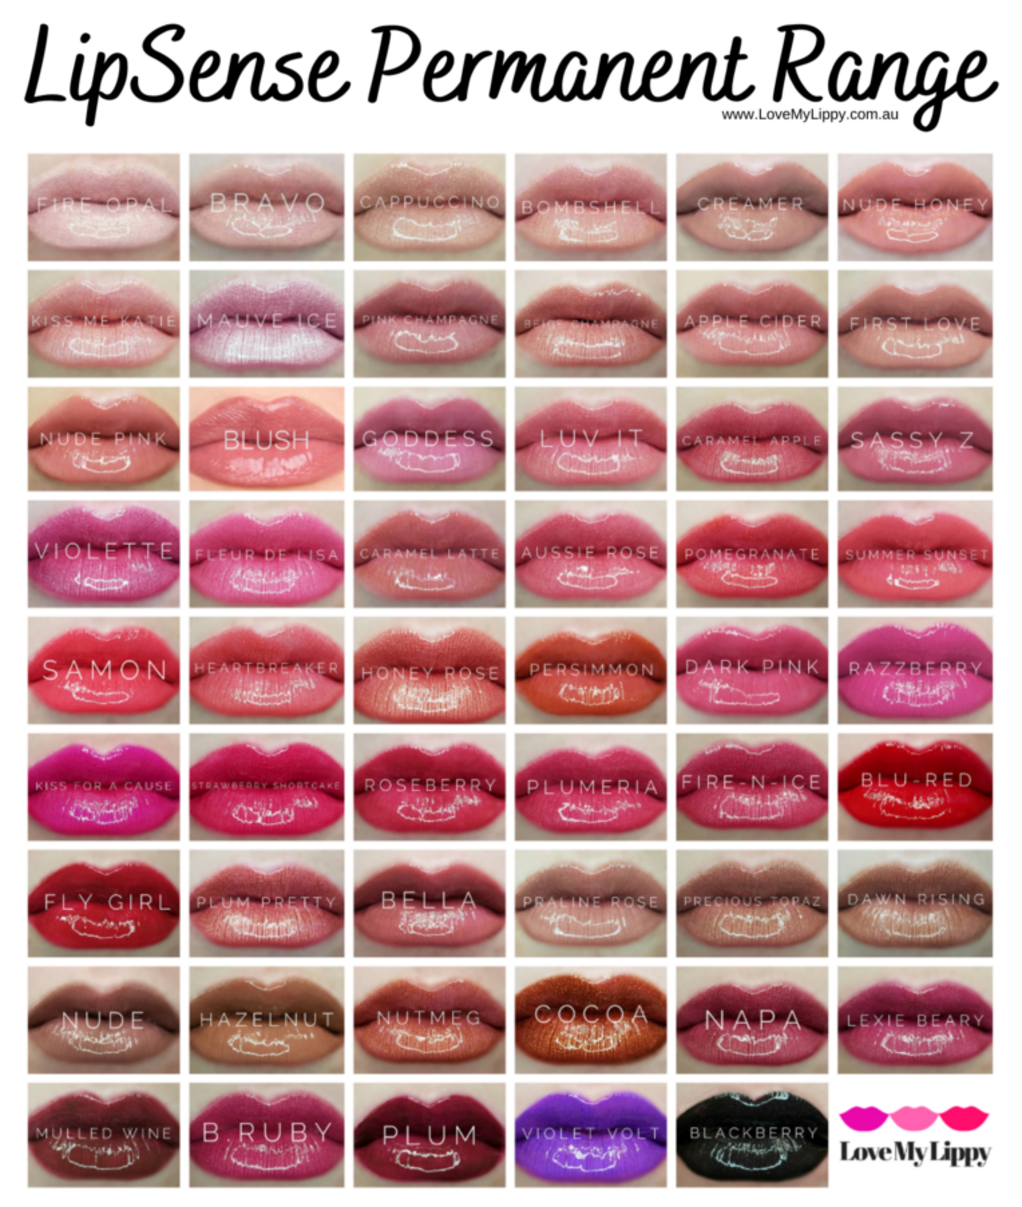 Text saying 'LipSense Permanent Range www.lovemylippy.com.au' at top in black, and below close up photos of permanent range of lip colours from browns, pinks, mauves, reds and purples with white text of lip color names on top of lip model.